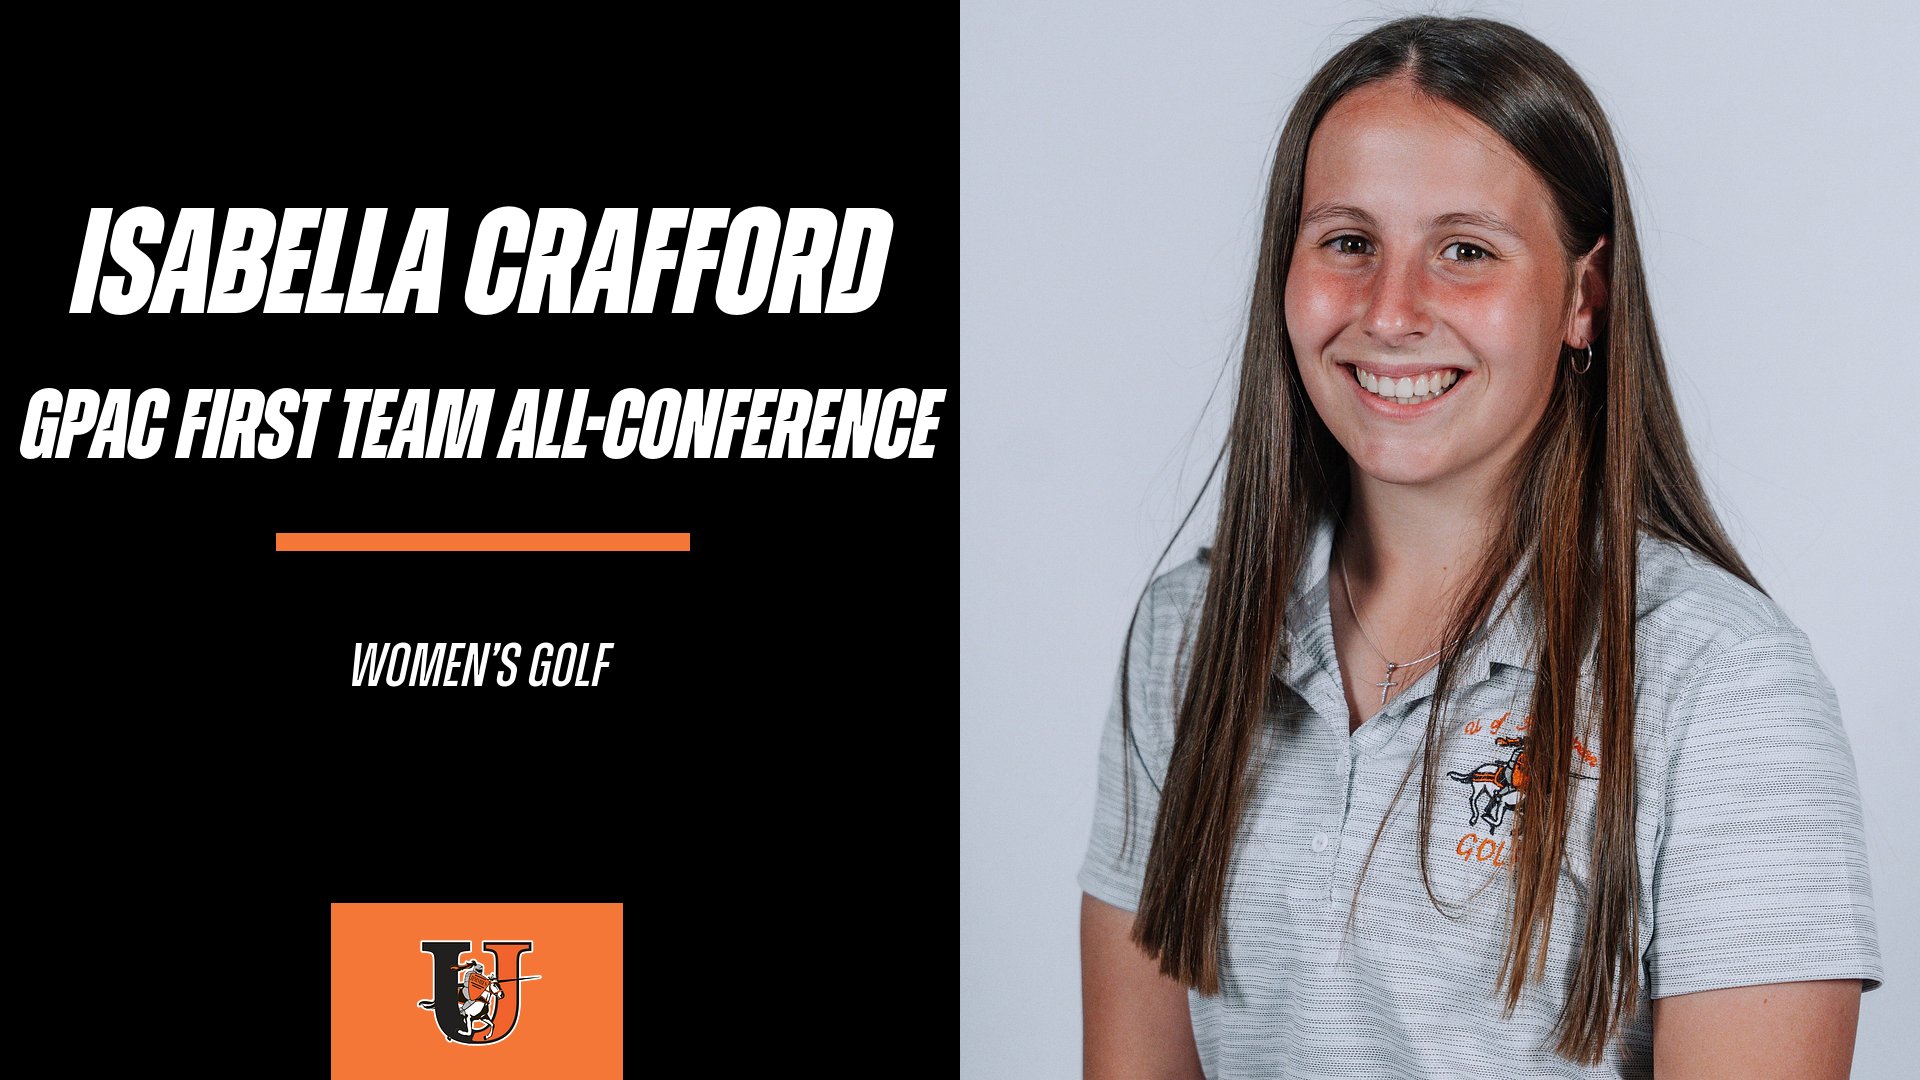 Isabella Crafford named GPAC First Team All-Conference